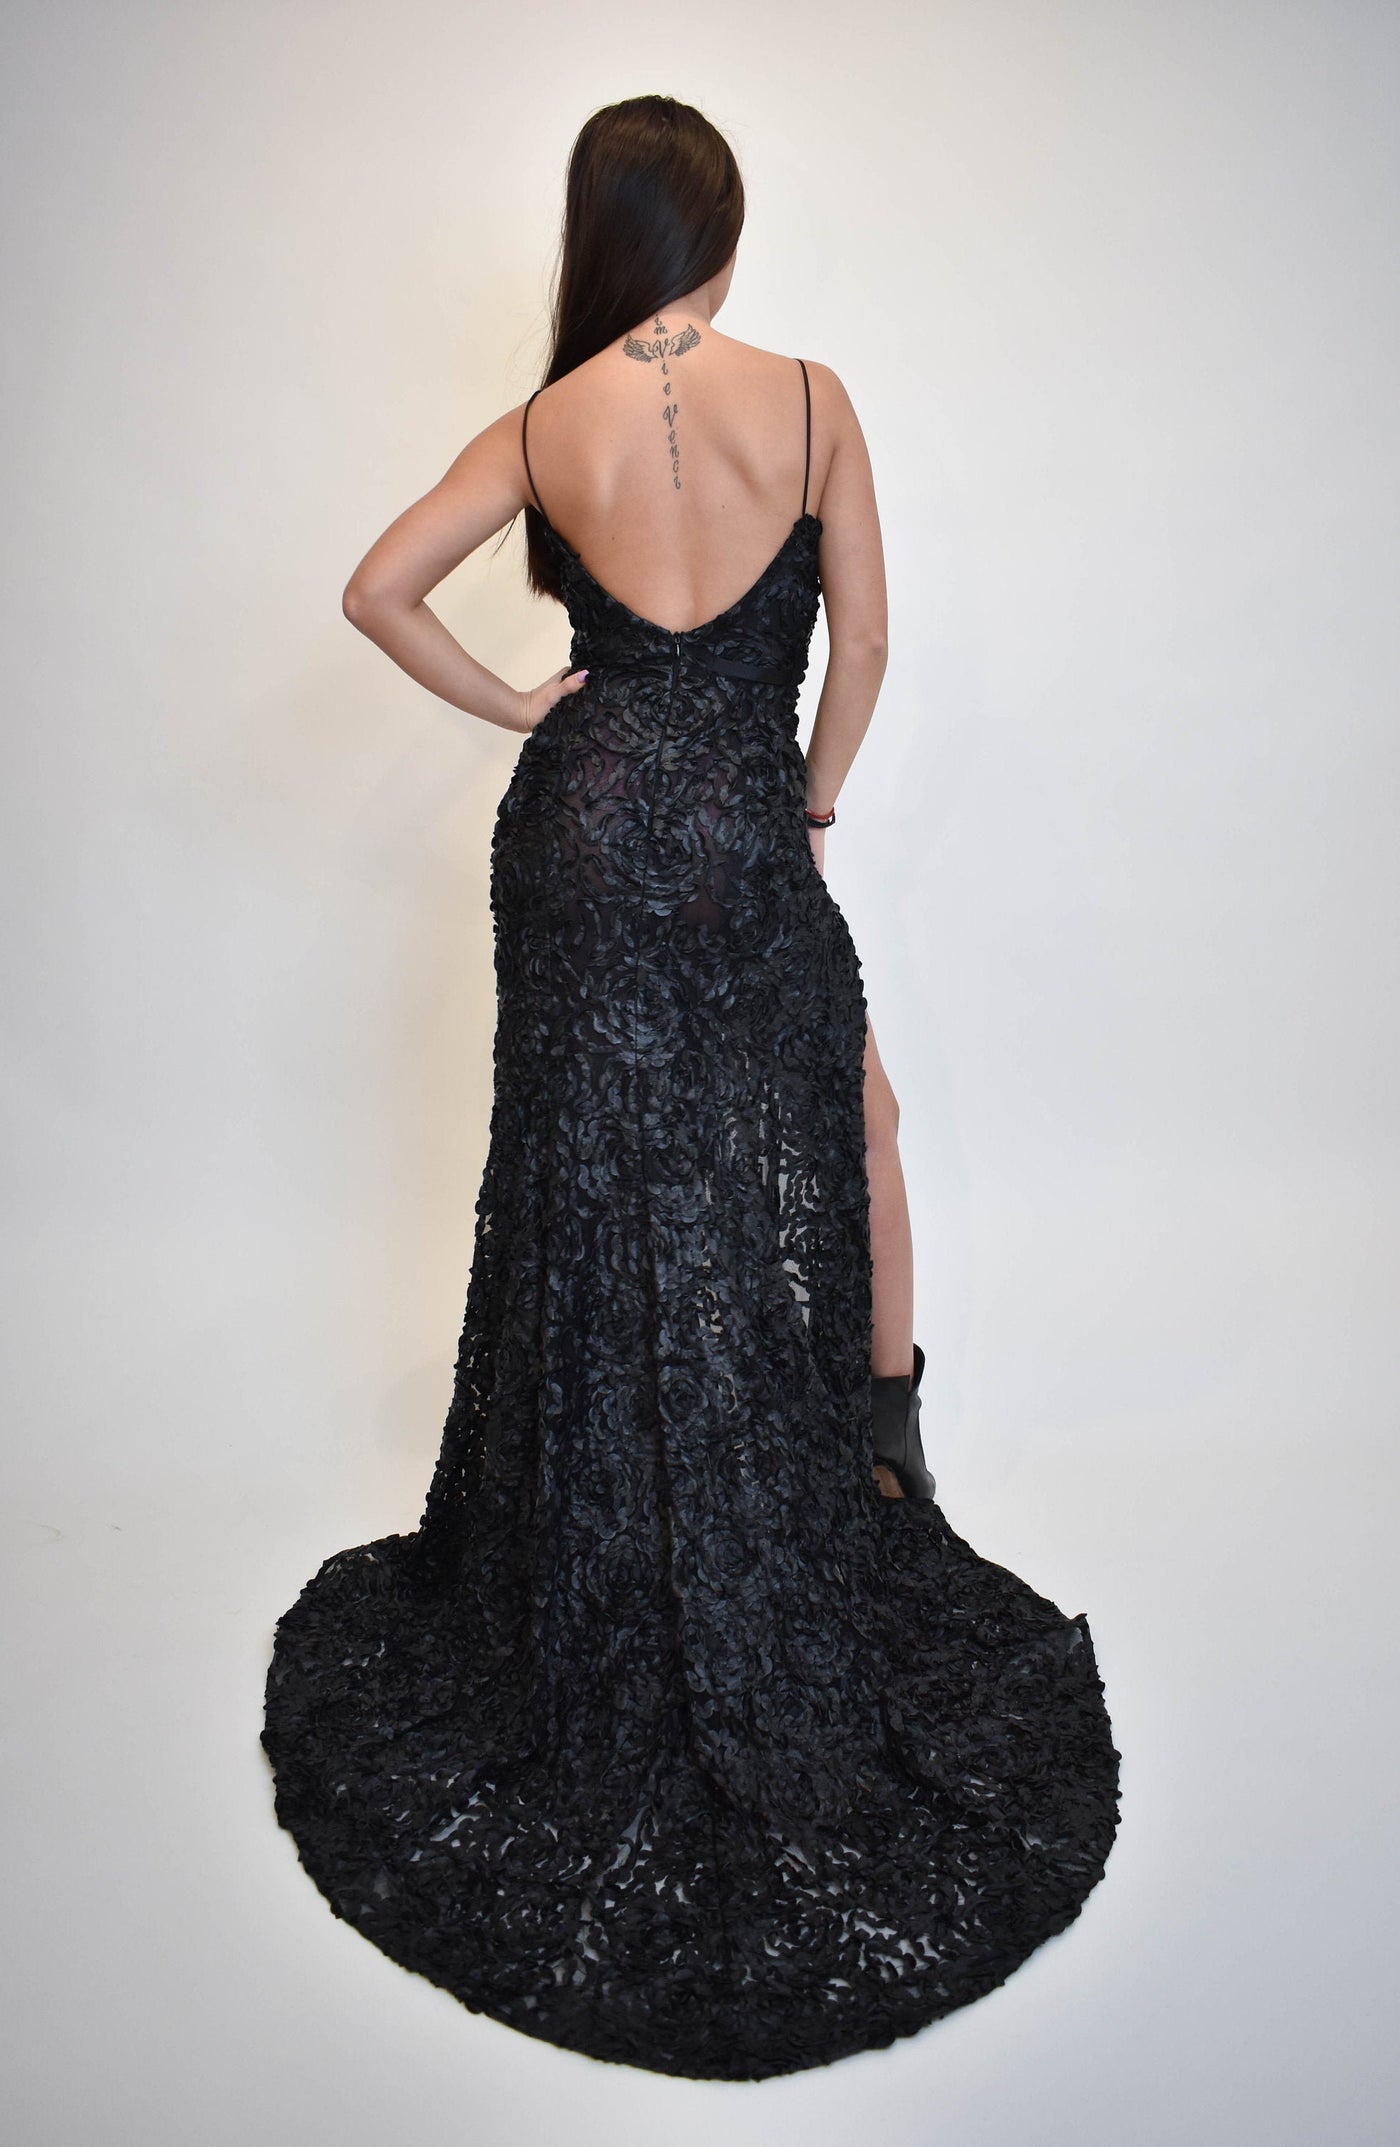 Exquisite black formal dress with open back F1939